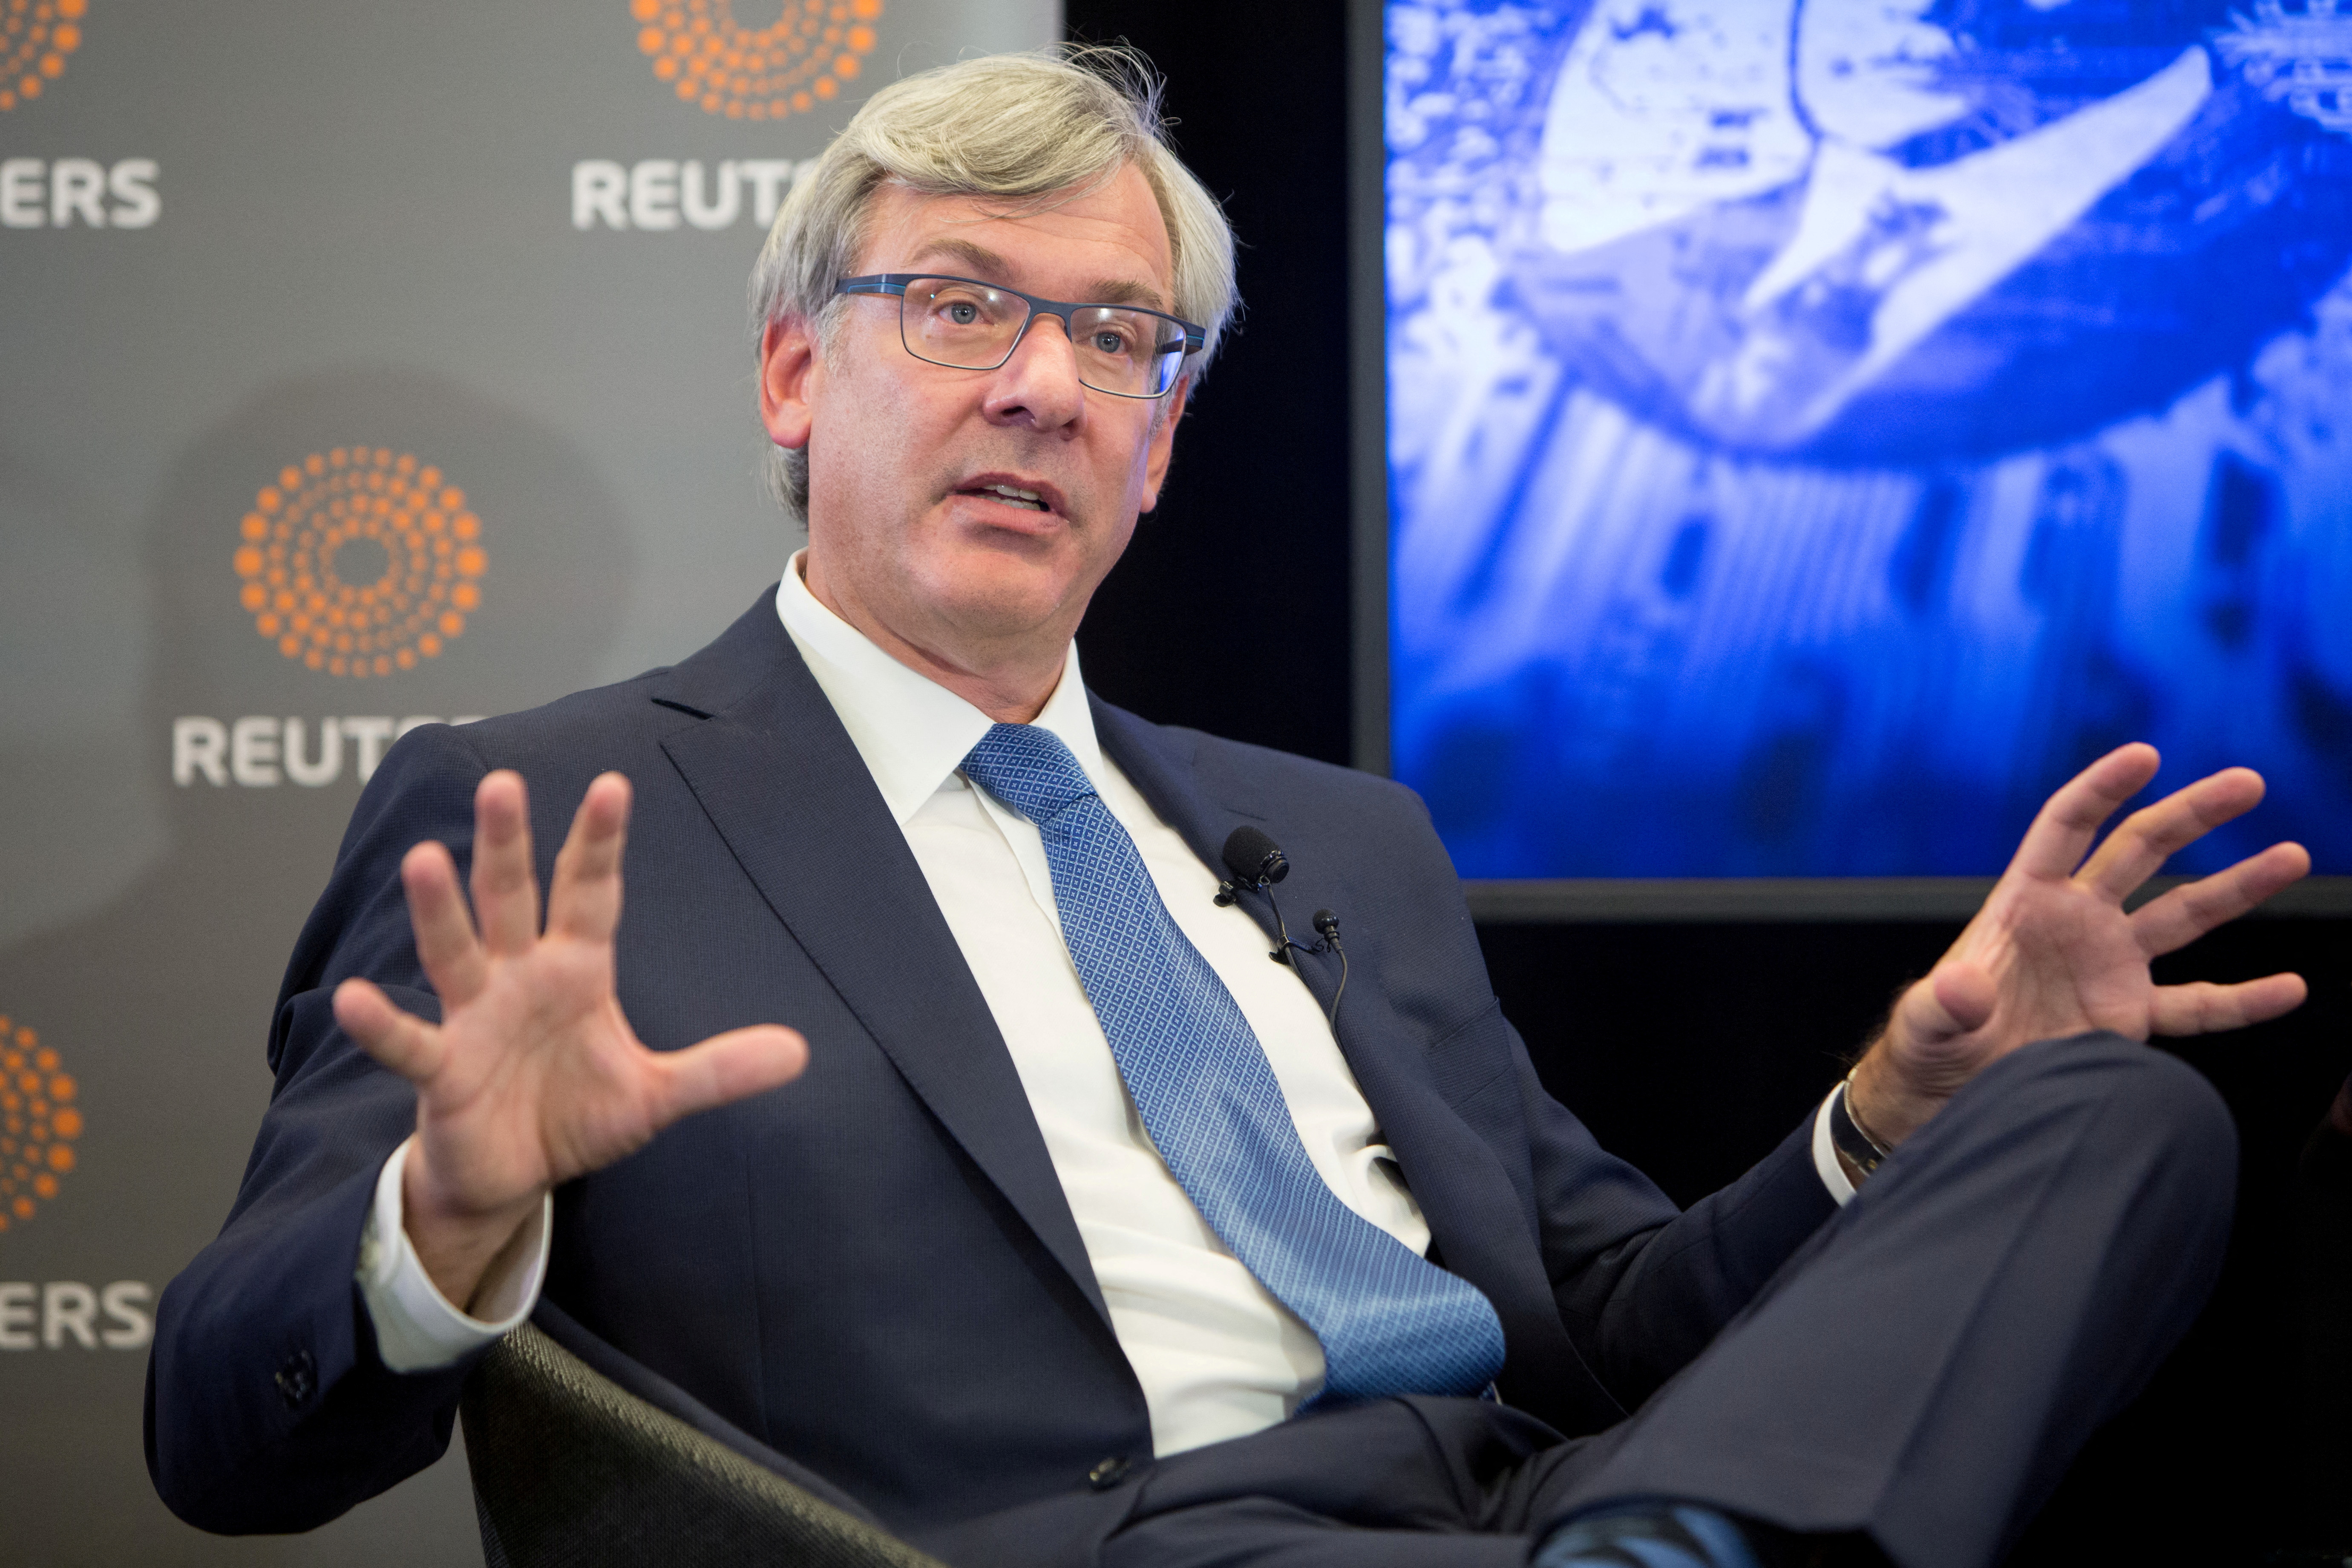 Royal Bank of Canada CEO David McKay speaks with Reuters Editor-in-Chief Steve Adler at a Reuters Newsmaker event